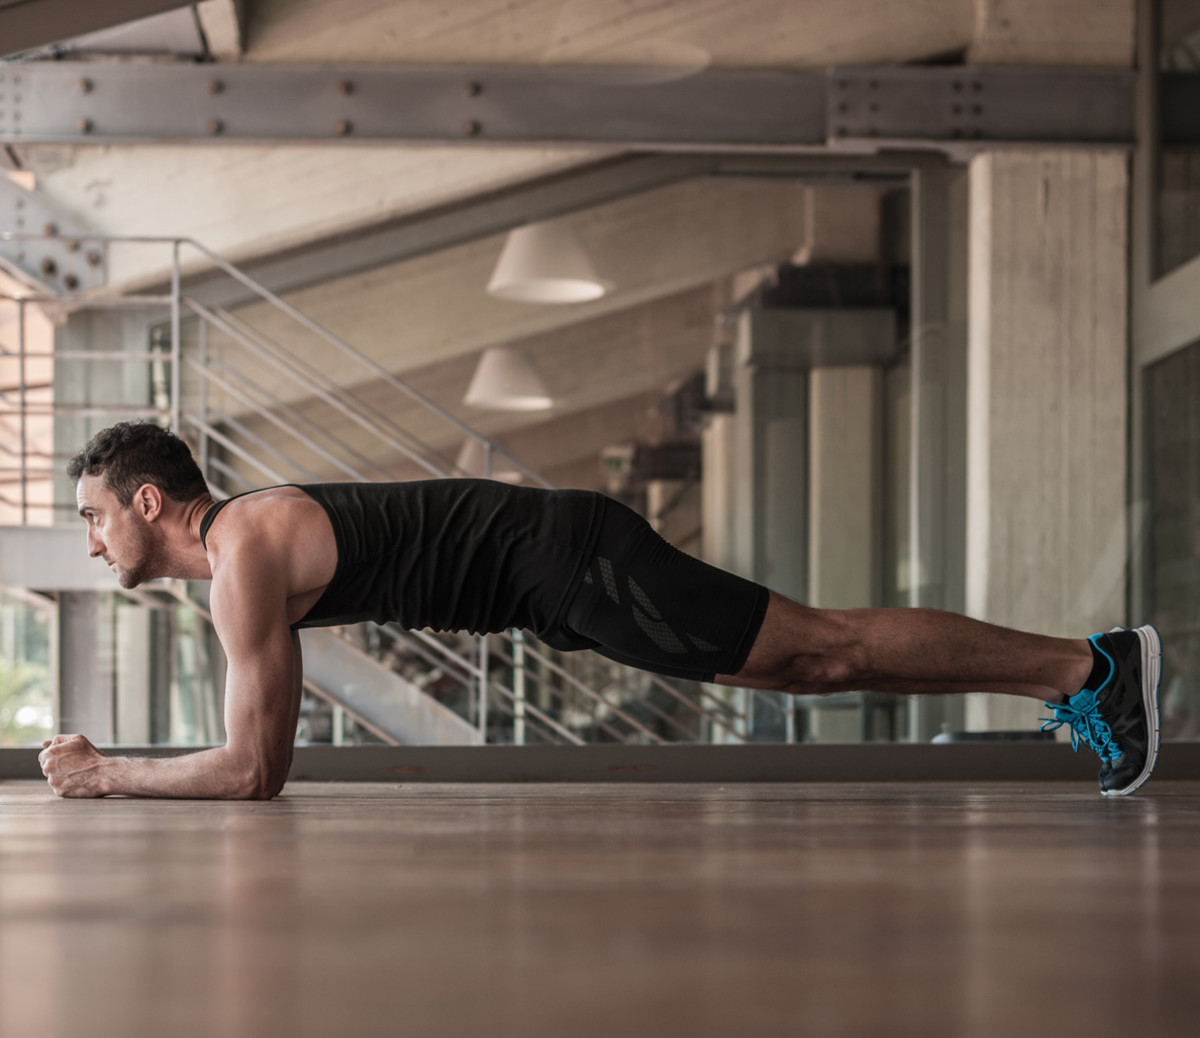 How to Do Plank Exercises: A Single Move for Stronger Abs - Men's Journal